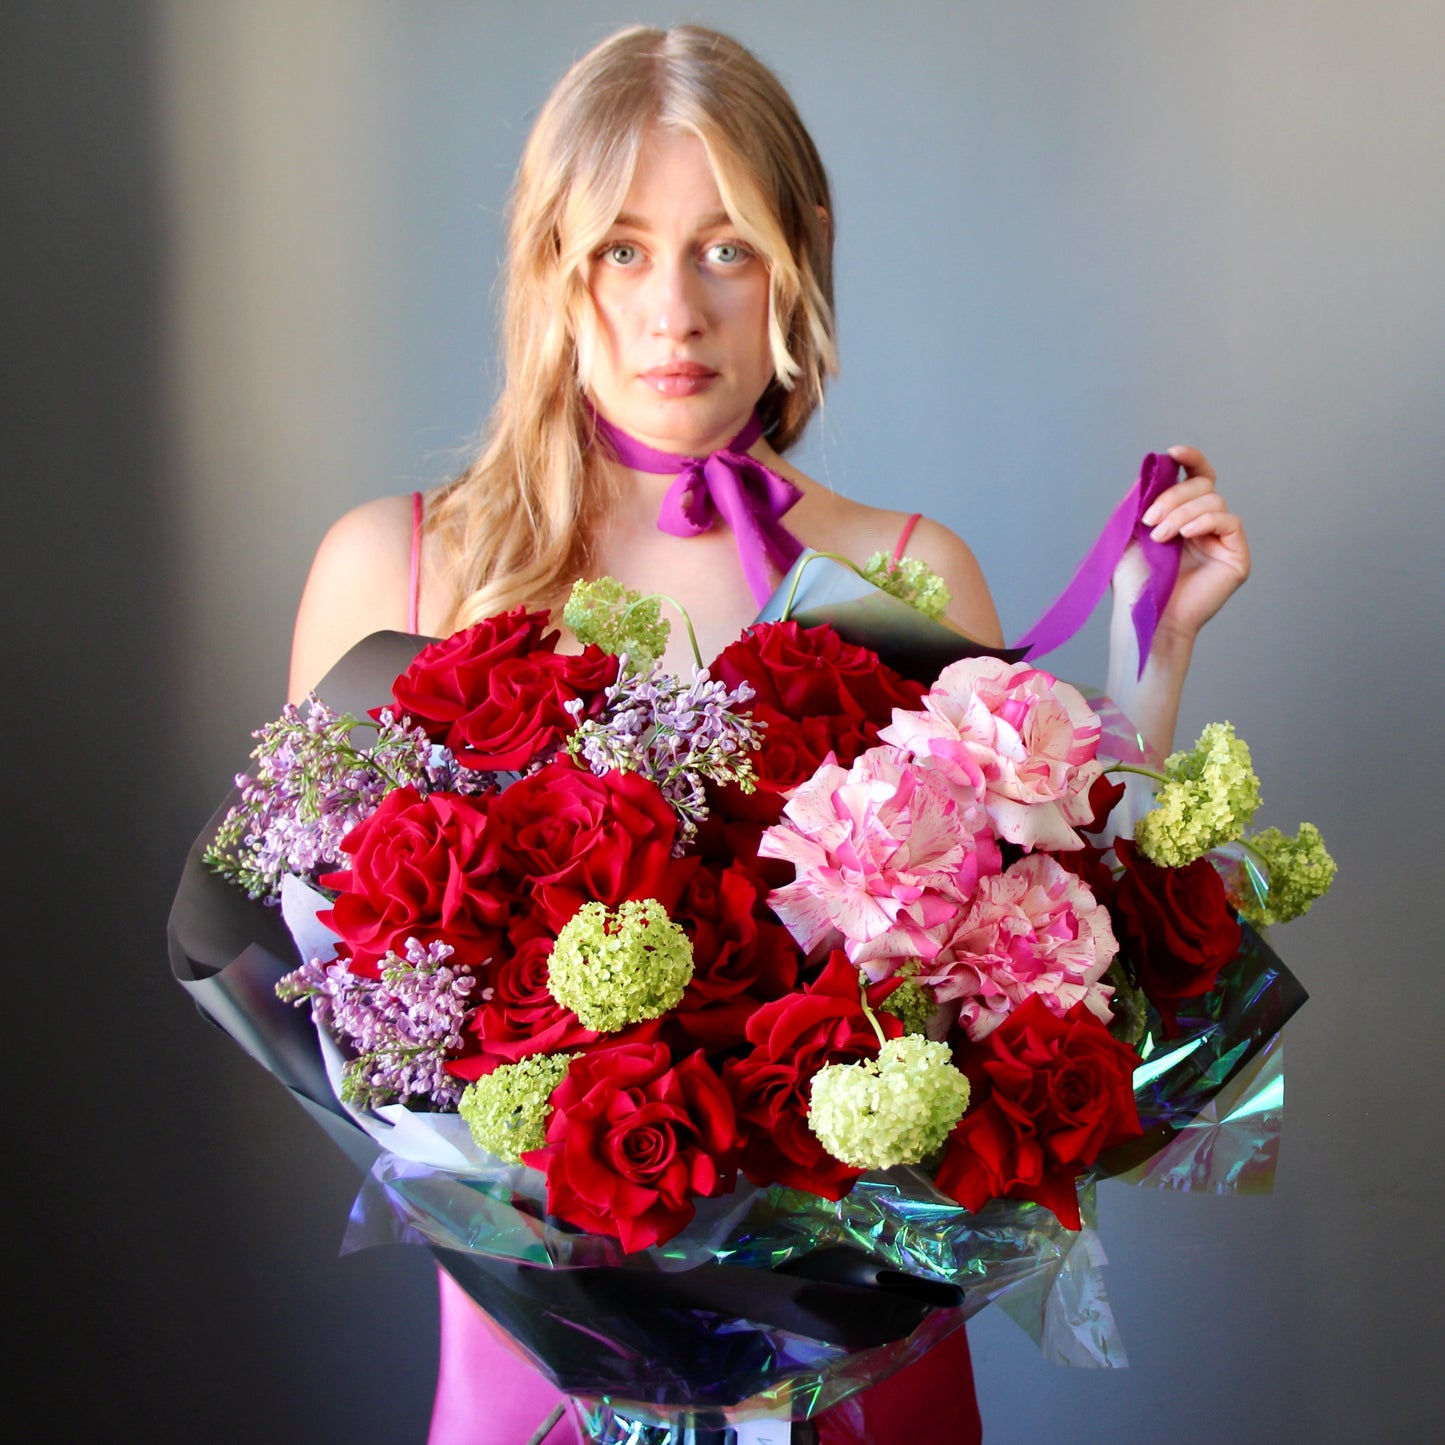 blonde girl with flowers